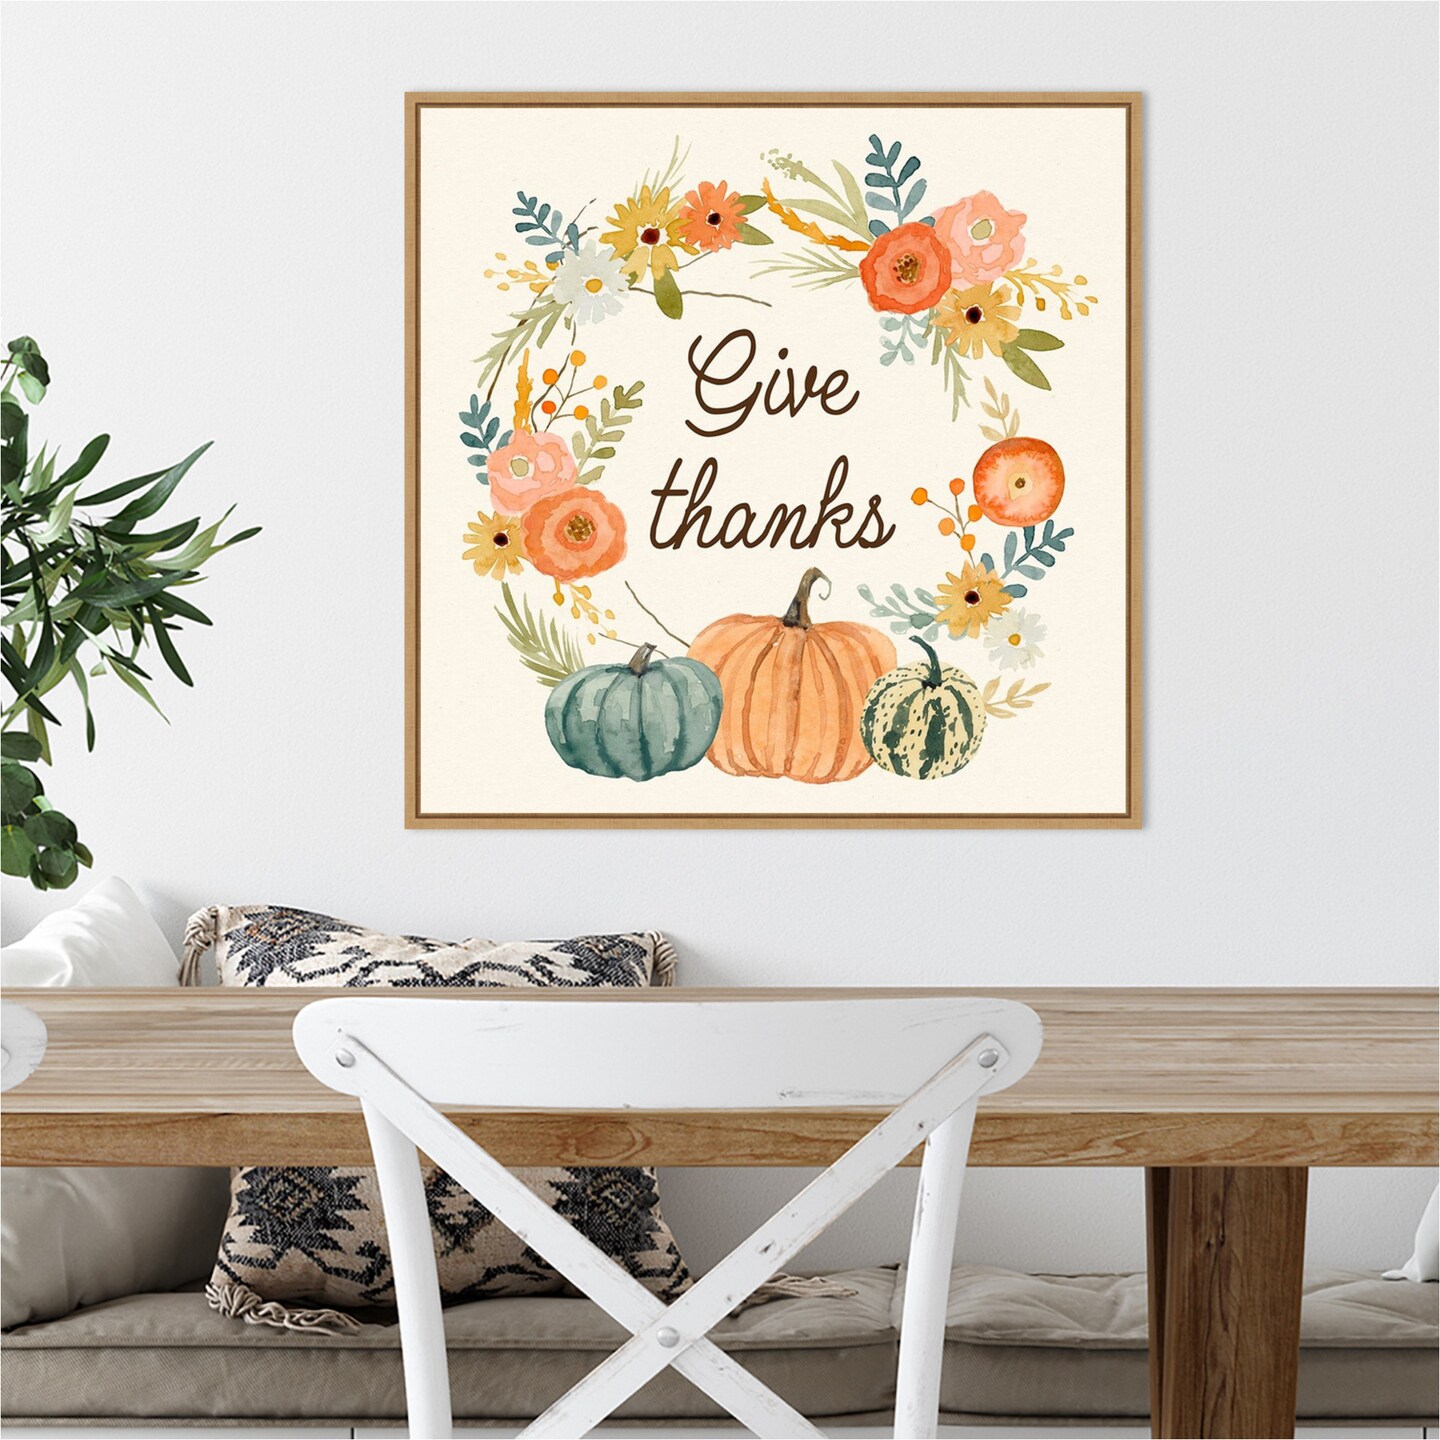 Harvest Home I by Victoria Barnes 22-in. W x 22-in. H. Canvas Wall Art Print Framed in Natural